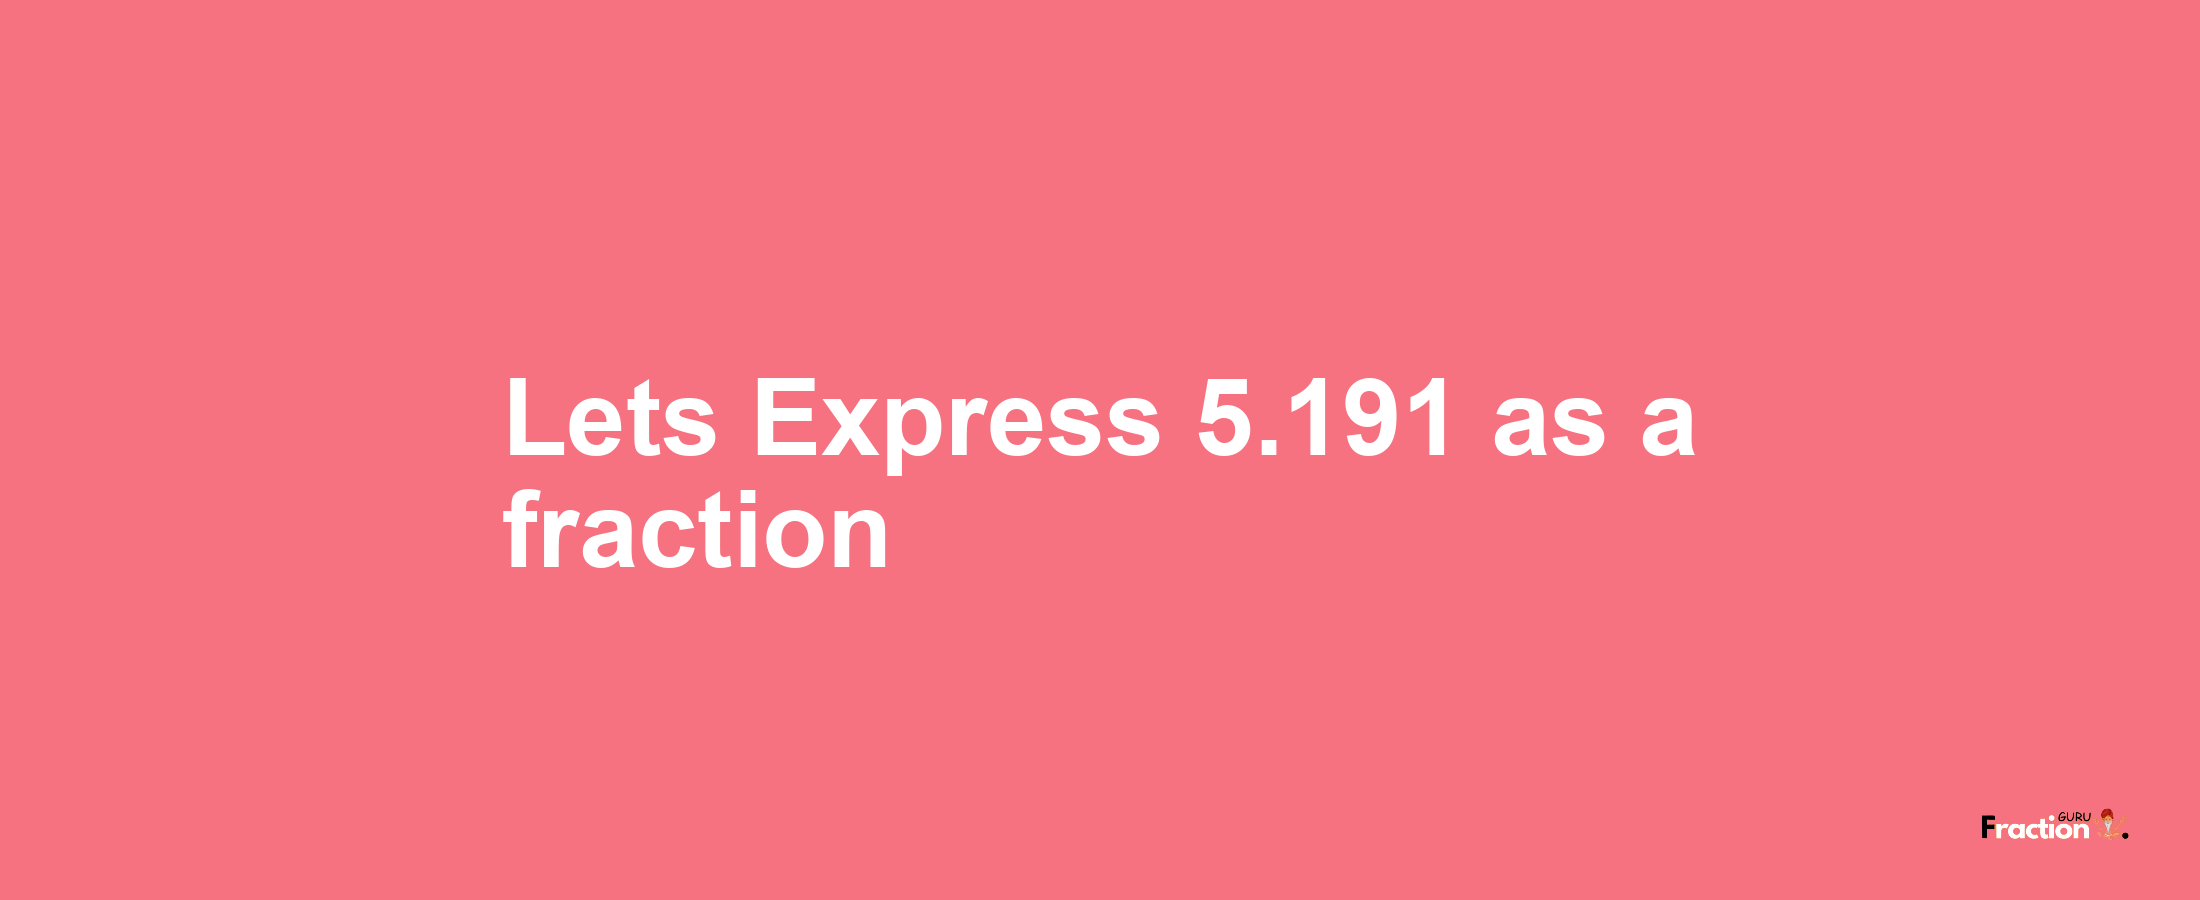 Lets Express 5.191 as afraction